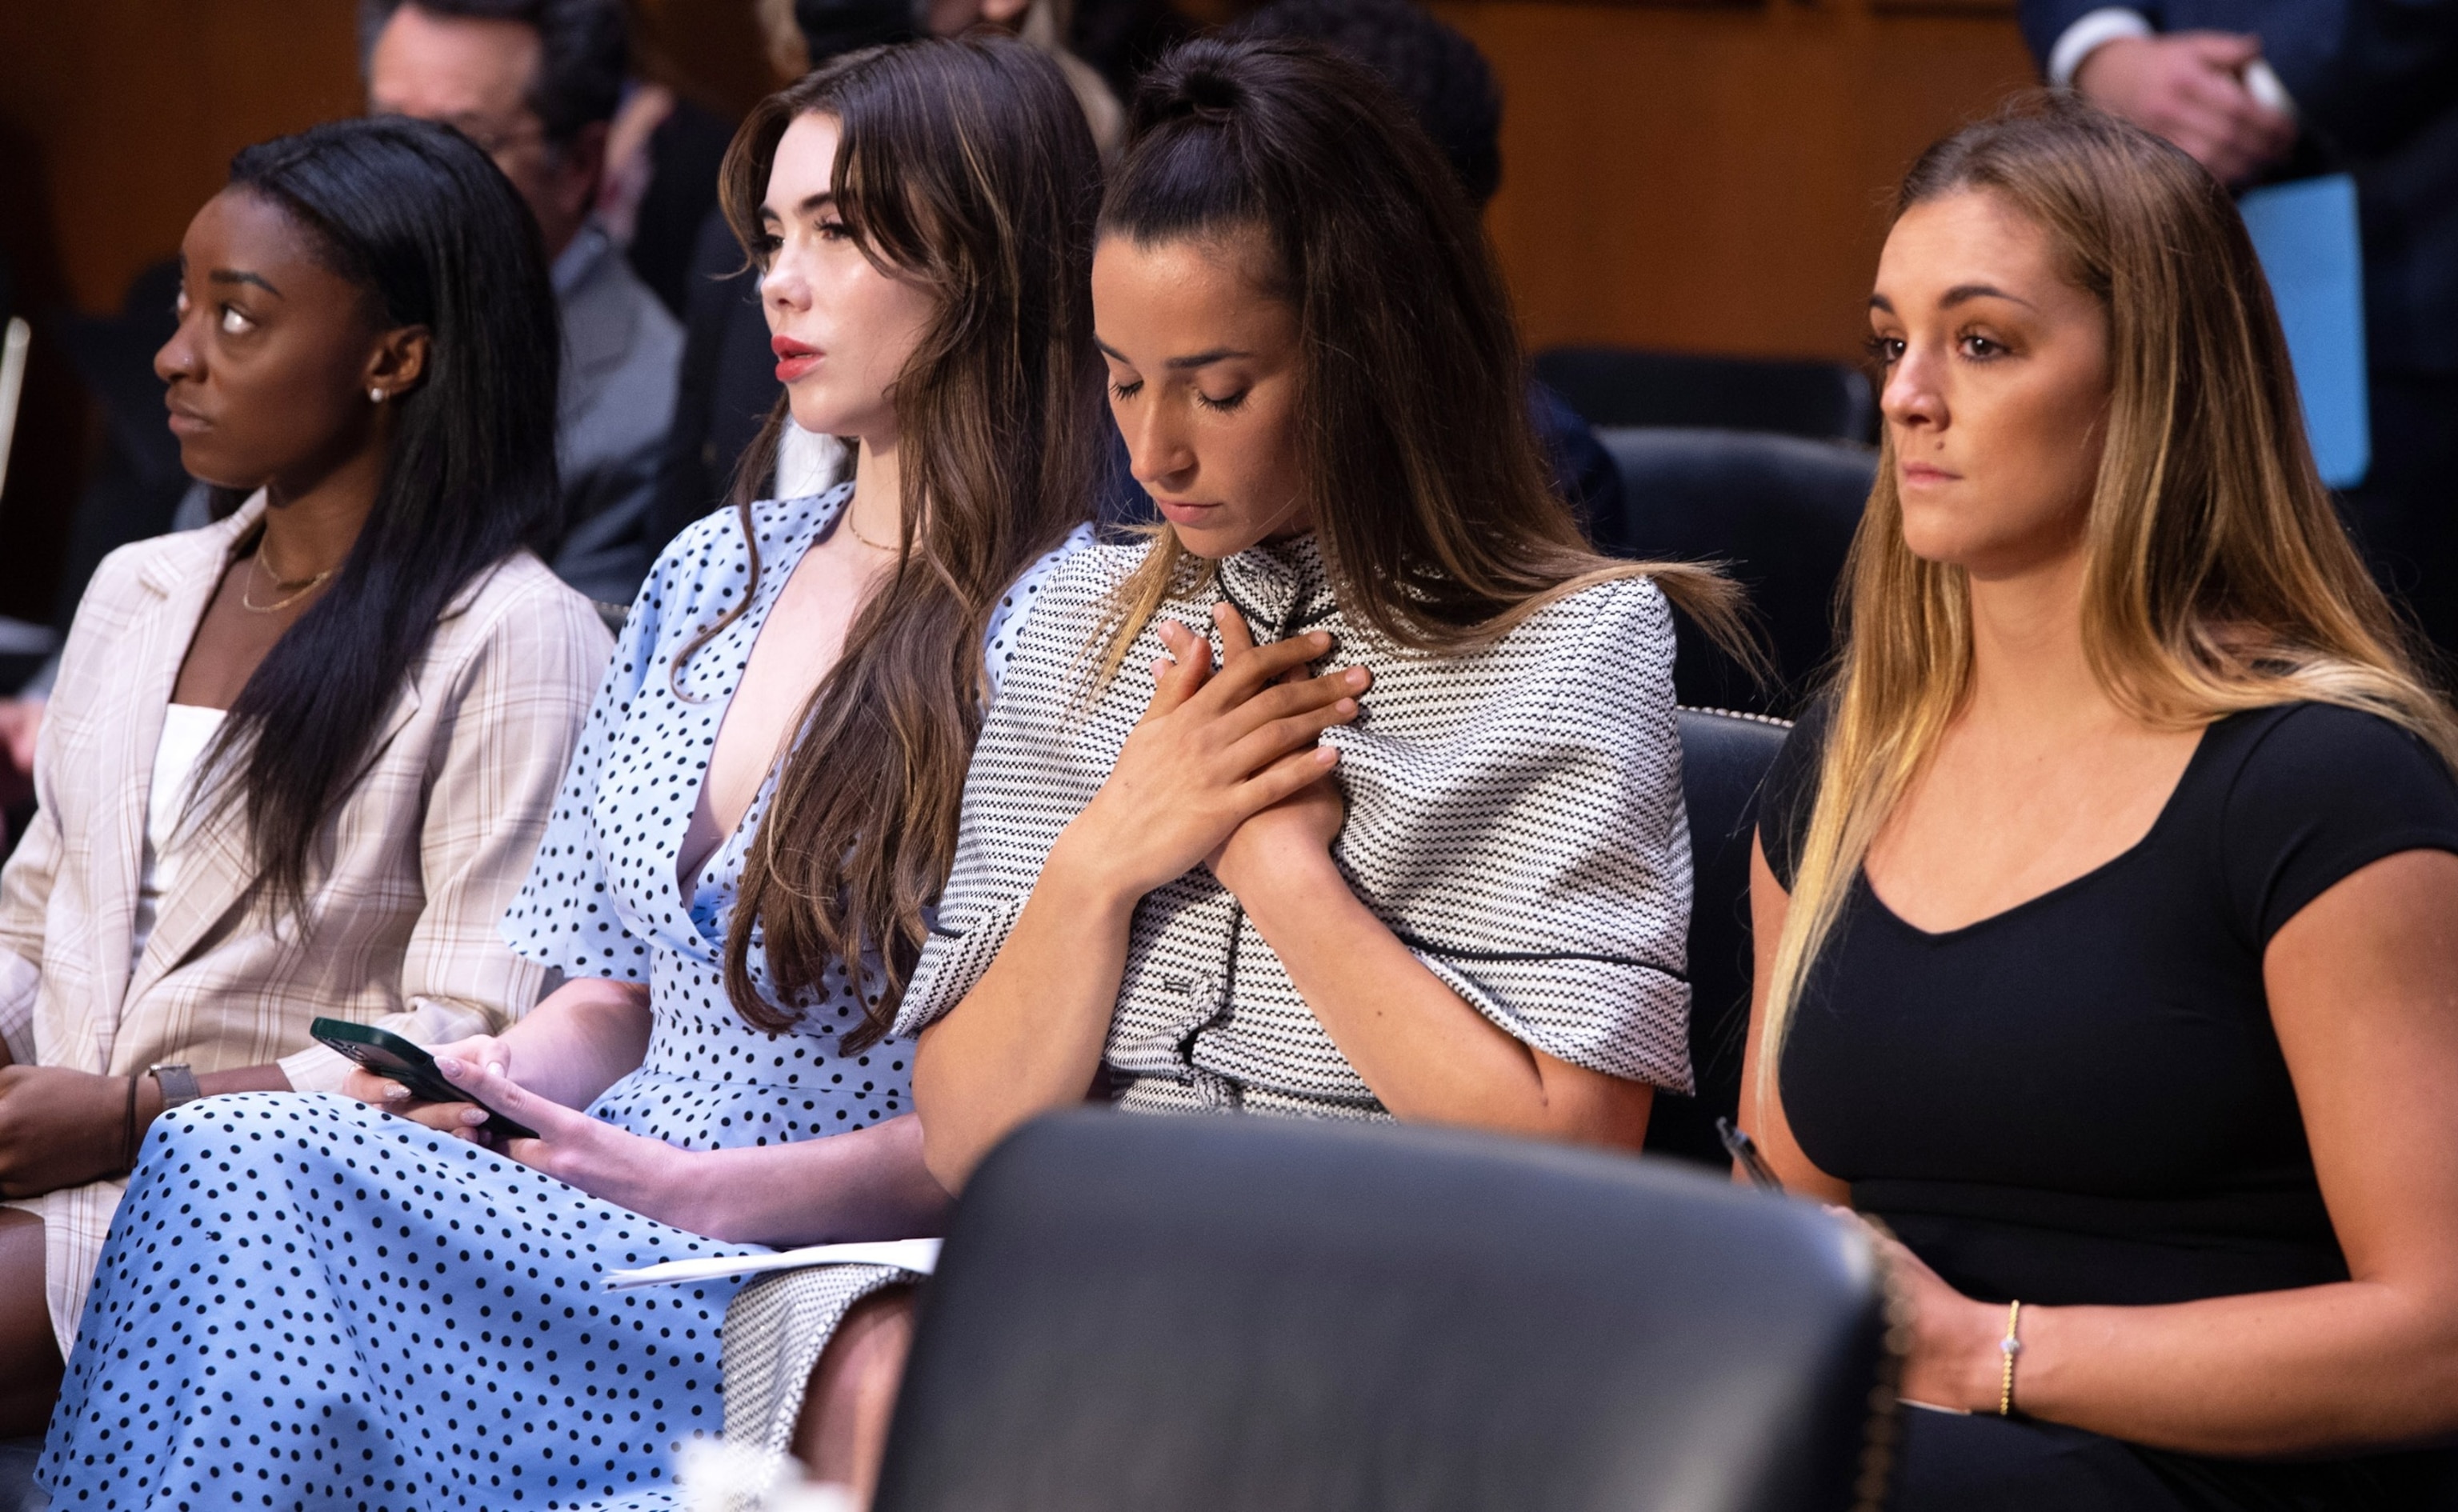 PHOTO: In this Sept. 15, 2021, file photo, Simone Biles, McKayla Maroney, Aly Raisman and Maggie Nichols arrive to testify during a Senate Judiciary hearing, on Capitol Hill, in Washington, D.C.